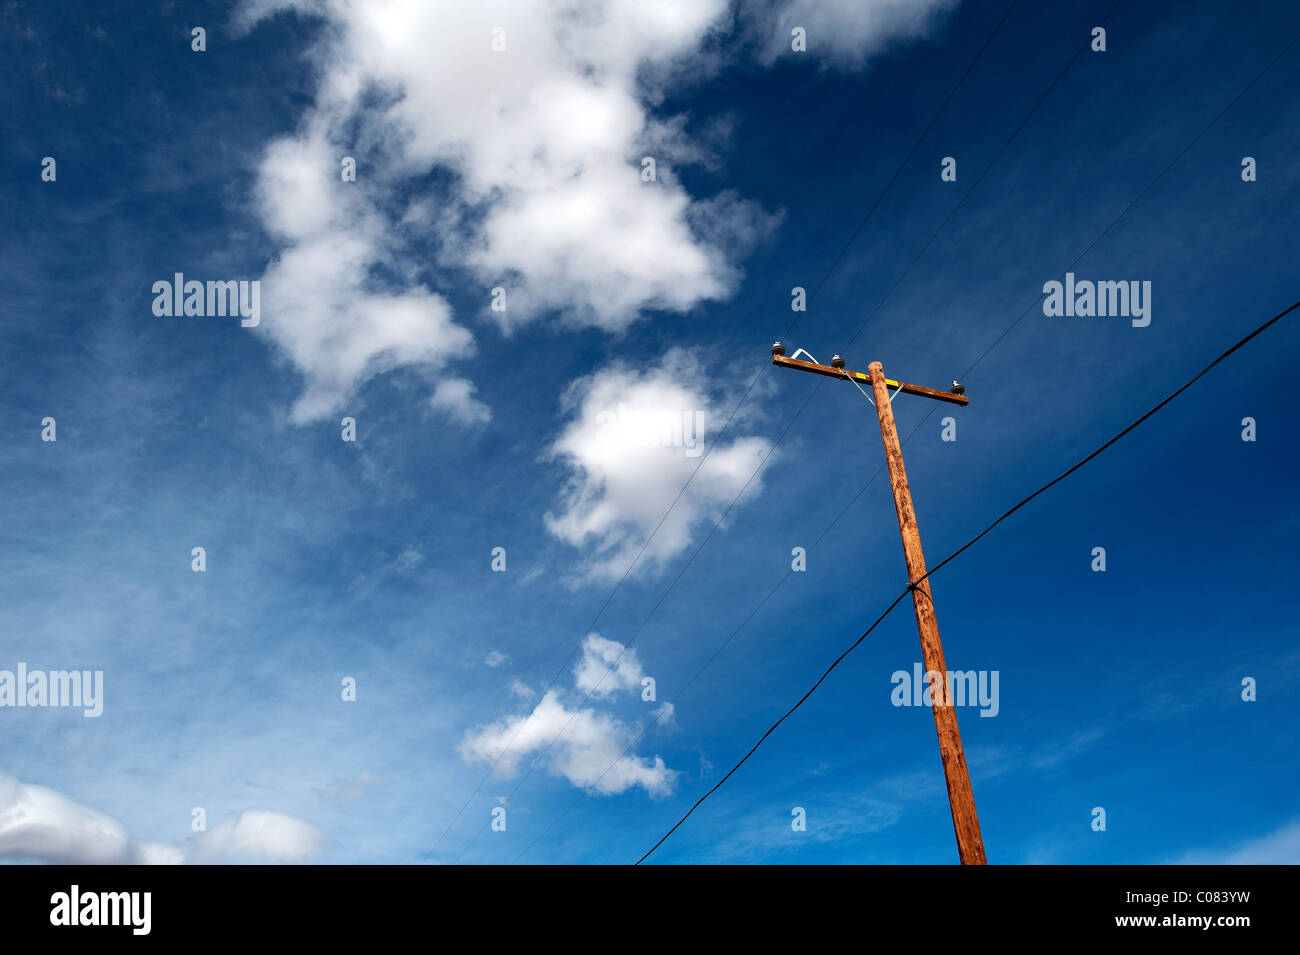 A wooden telegraph pole set against a blue sky with white clouds. California Desert, USA Stock Photo